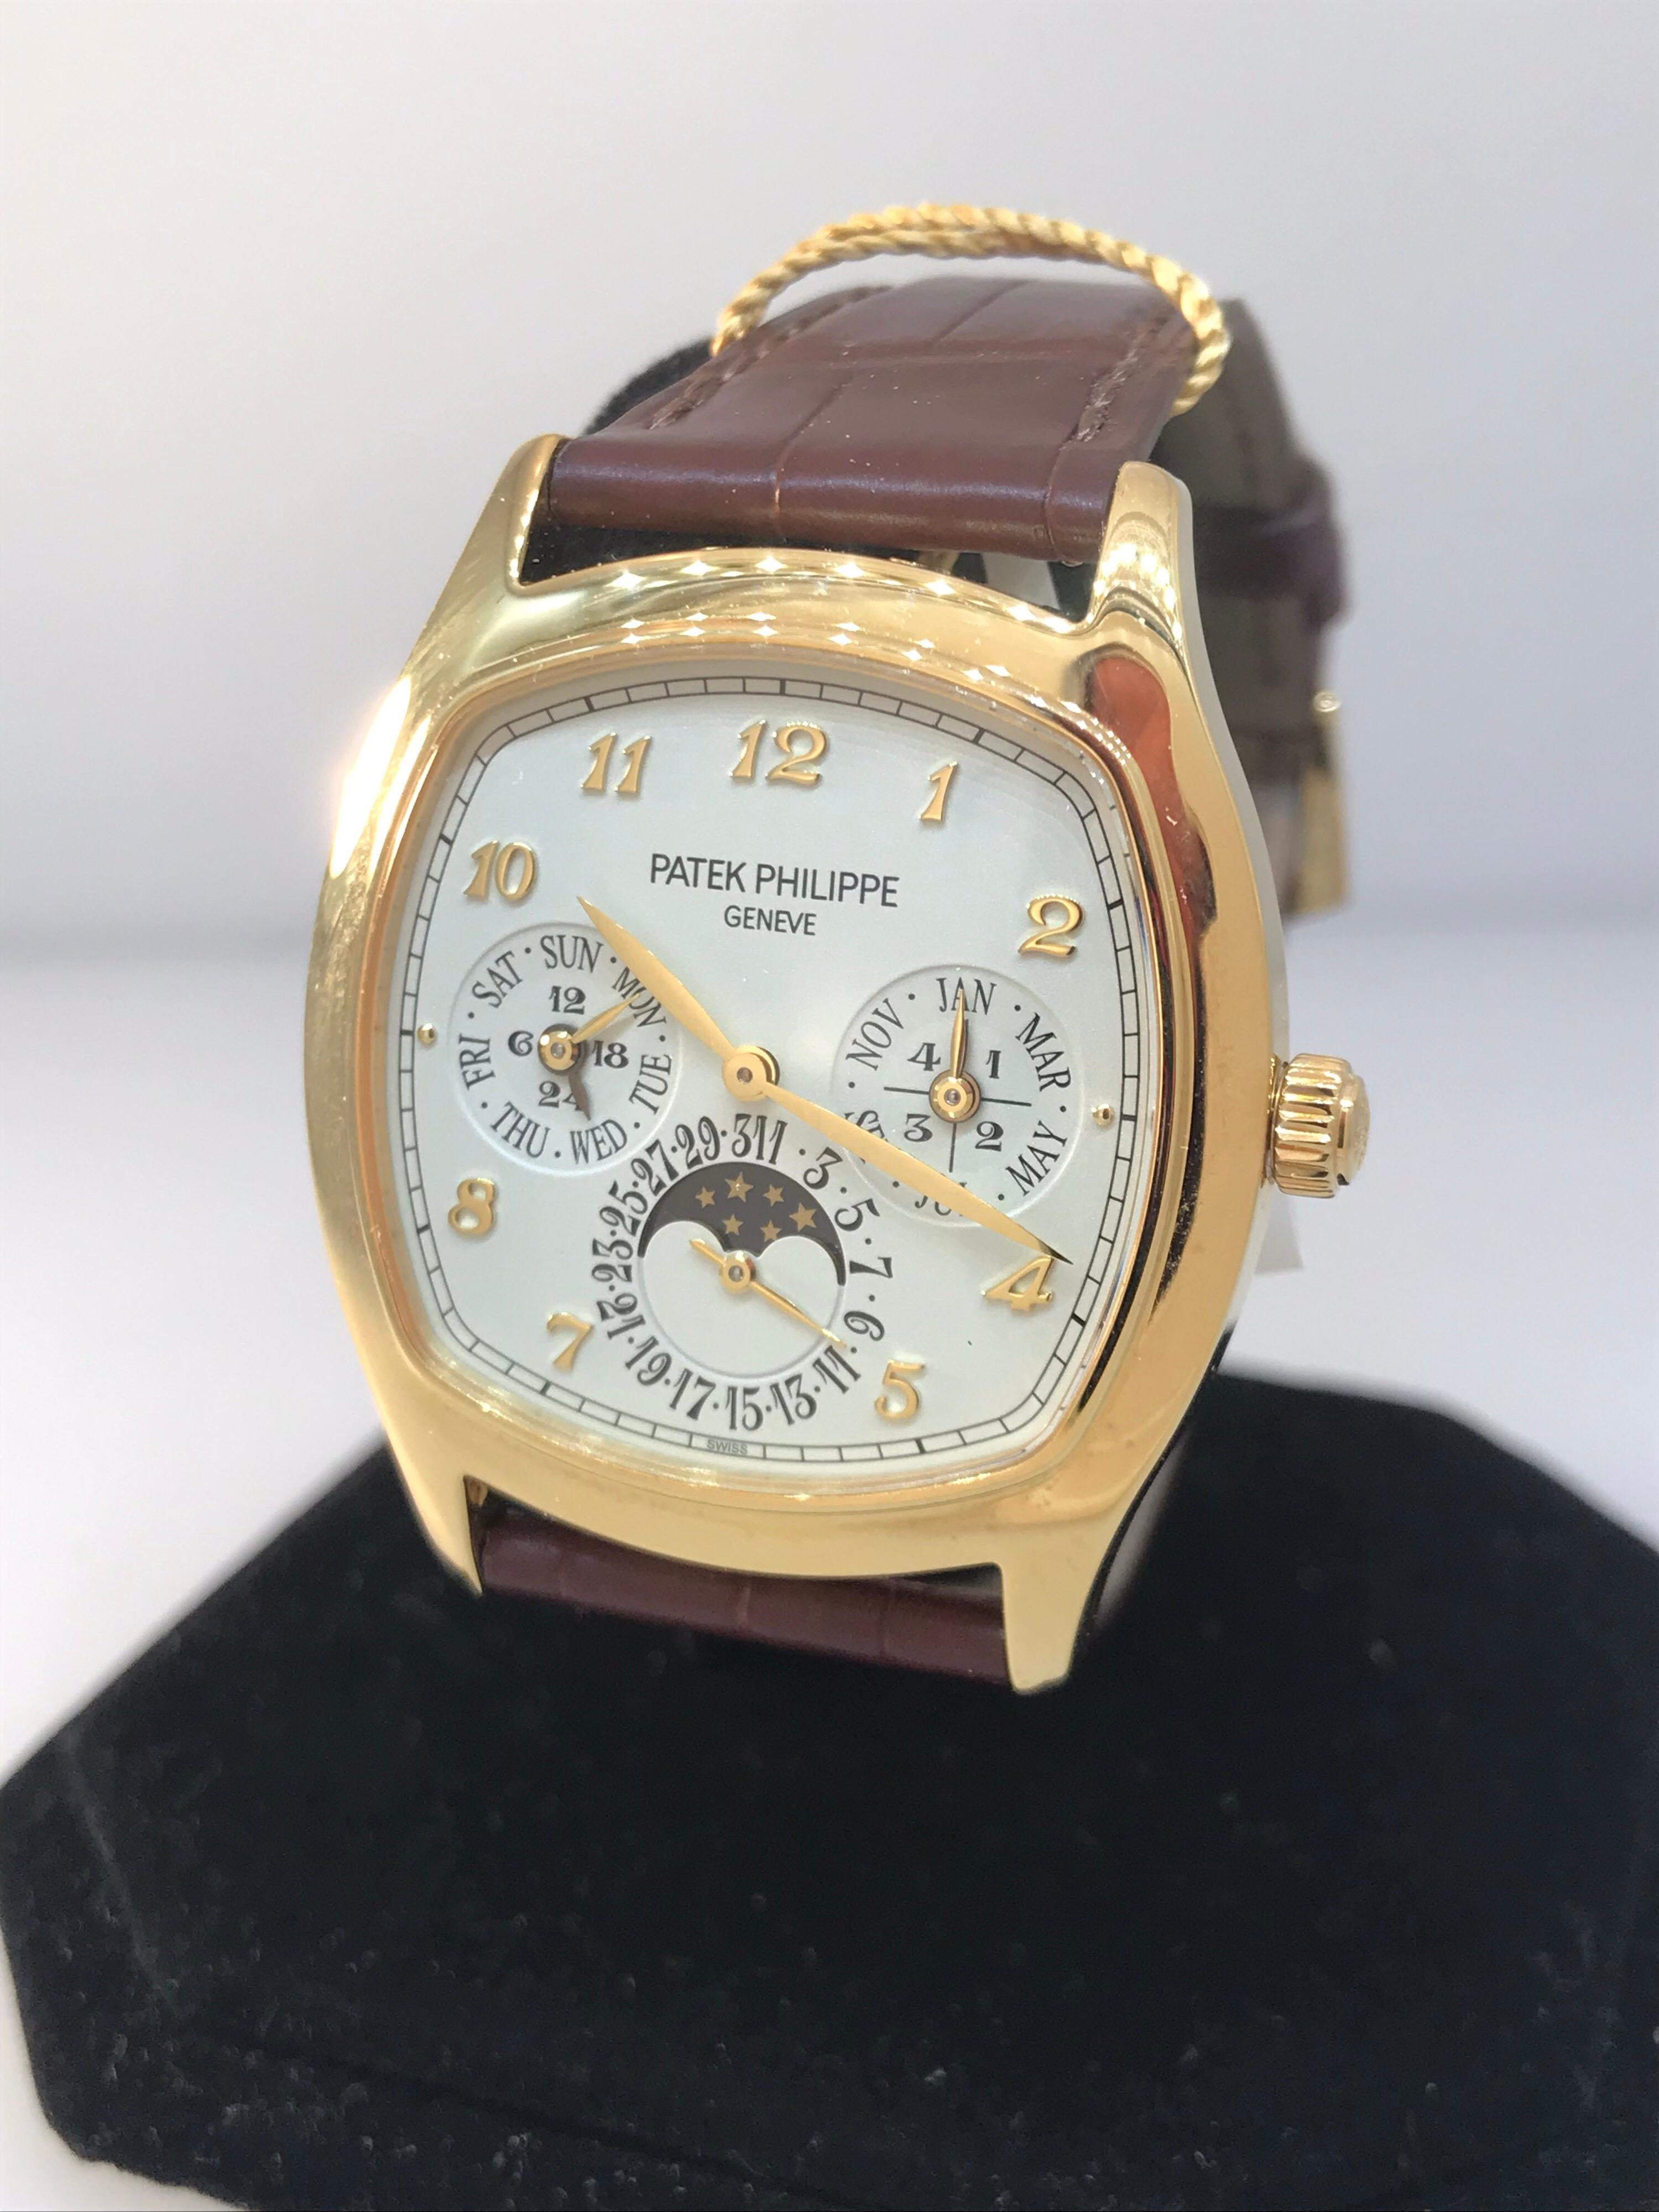 Patek Philippe Grand Complications Men's Watch

Model Number: 5940J-001

100% Authentic

Brand New

Comes with original Patek Philippe Box and Papers

18 Karat Yellow Gold Dial

Case Dimensions: 44.6mm x 37mm

Cream Dial

Functions: Leap year,